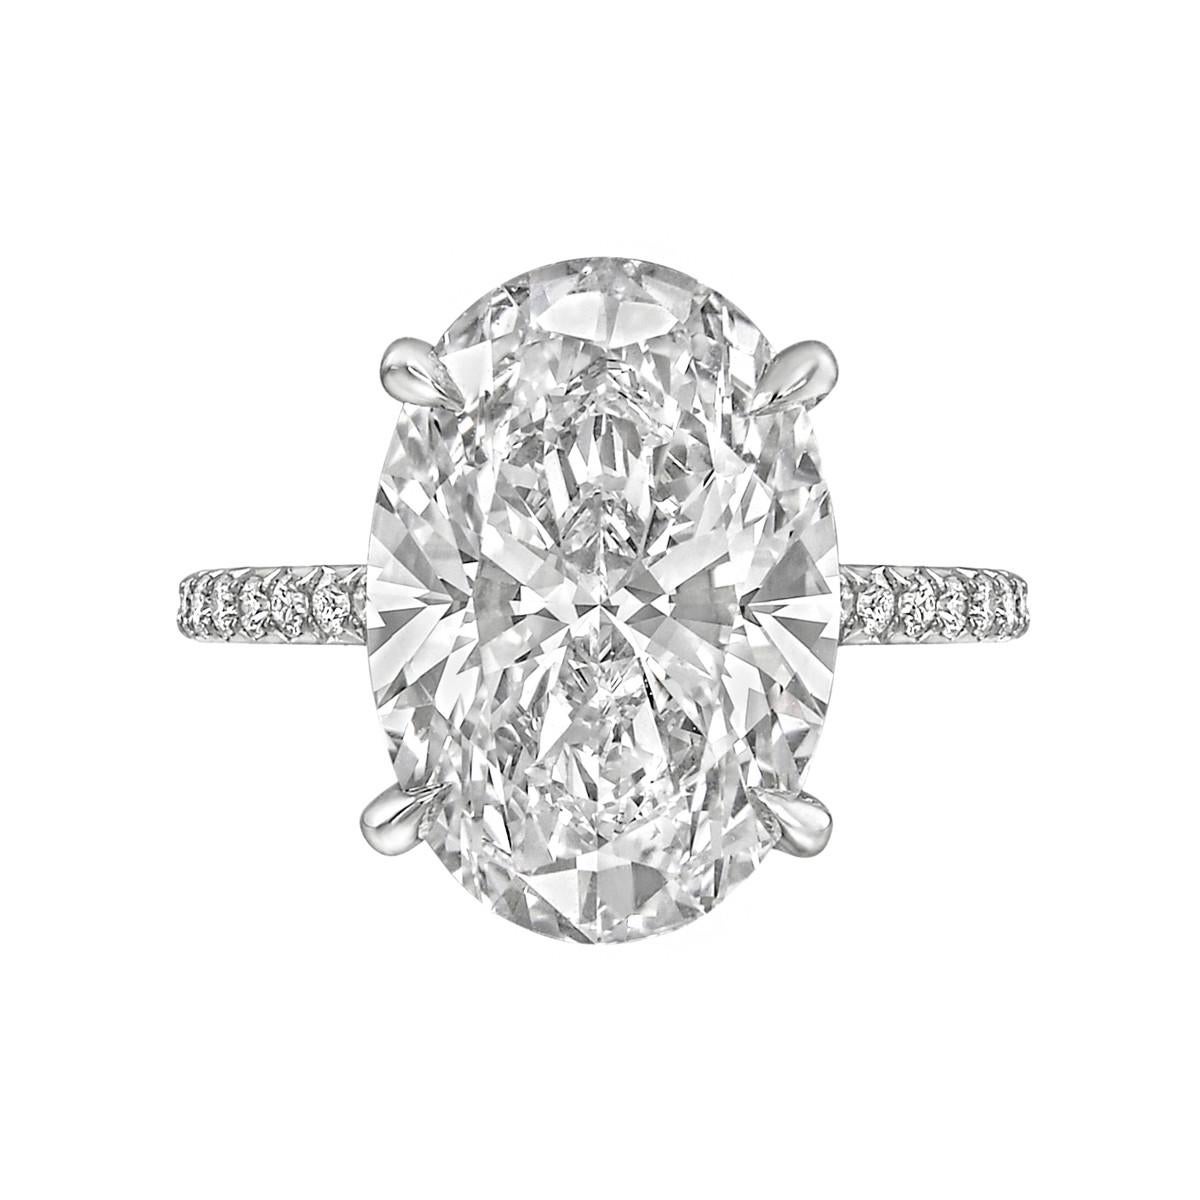 6.21 Carat Exceptional Type IIA Oval-Cut Diamond Engagement Ring